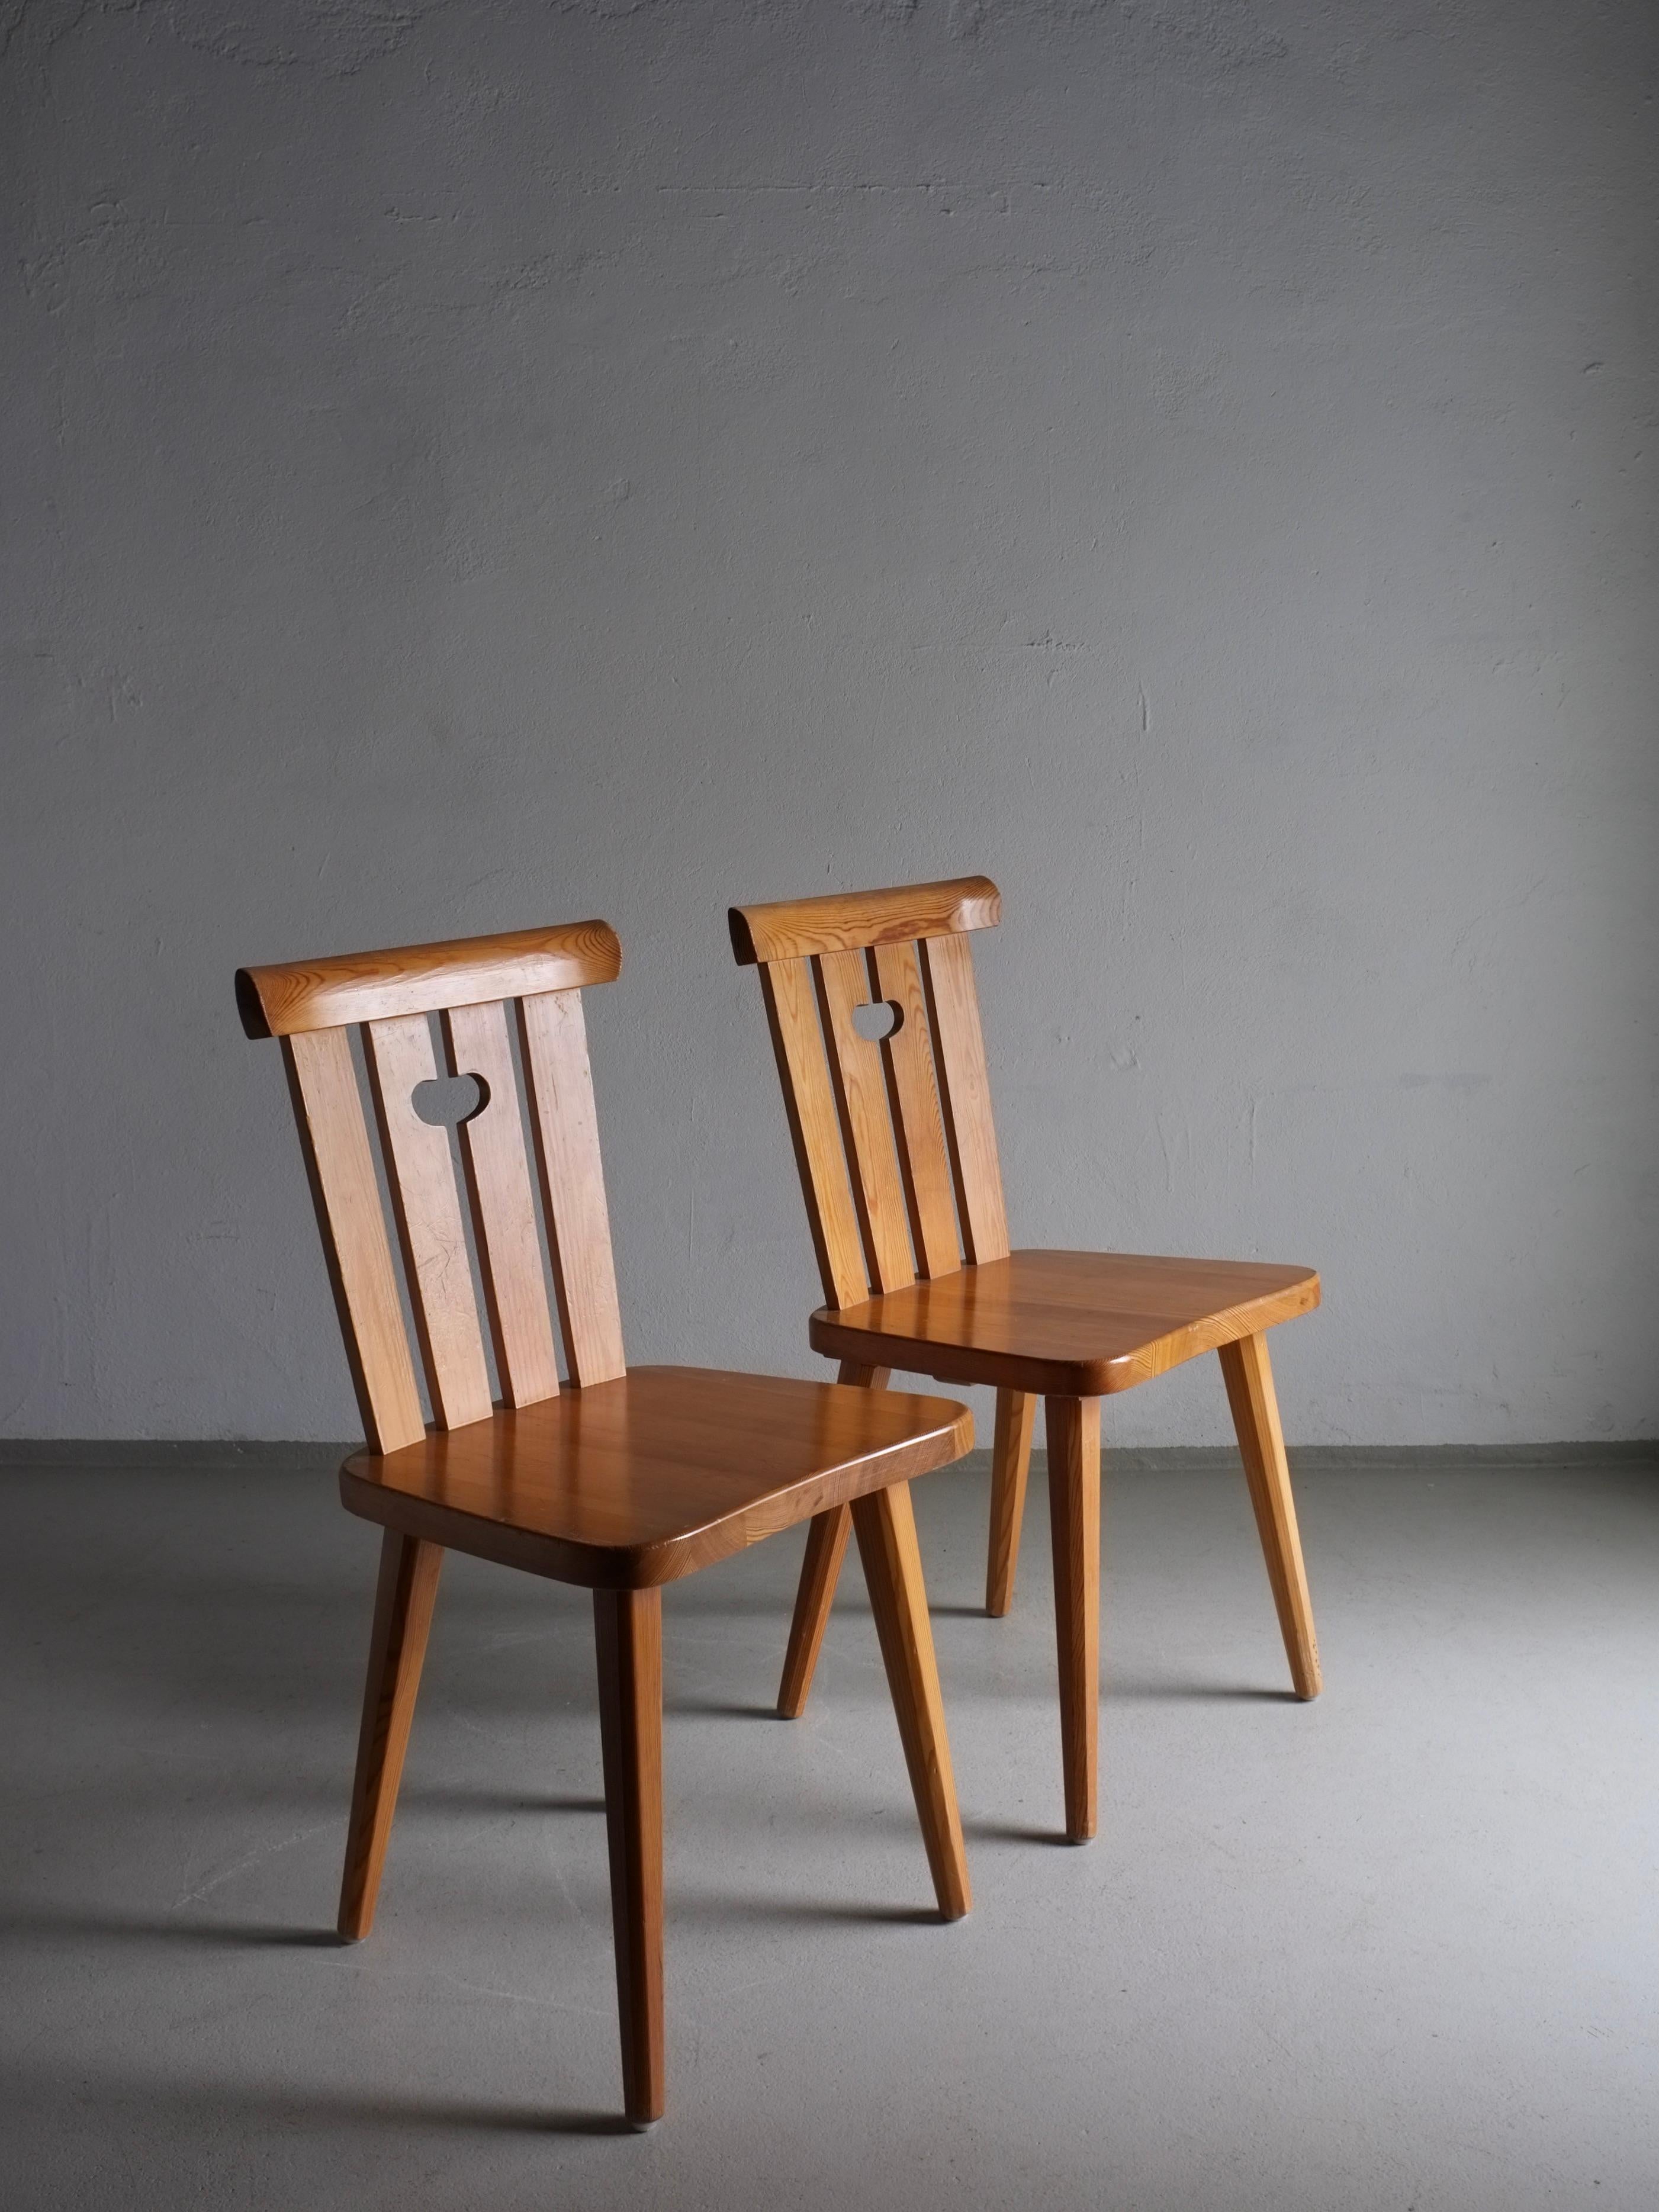 Set of 2 solid pine dining chairs designed by Göran Malmvall in the 1940s. Four more chairs are available, please ask.

Additional information:
Country of manufacture: Sweden
Period: 1940s
Dimensions: W 43 cm x D 40 cm x H 80 cm, H(seat) 44